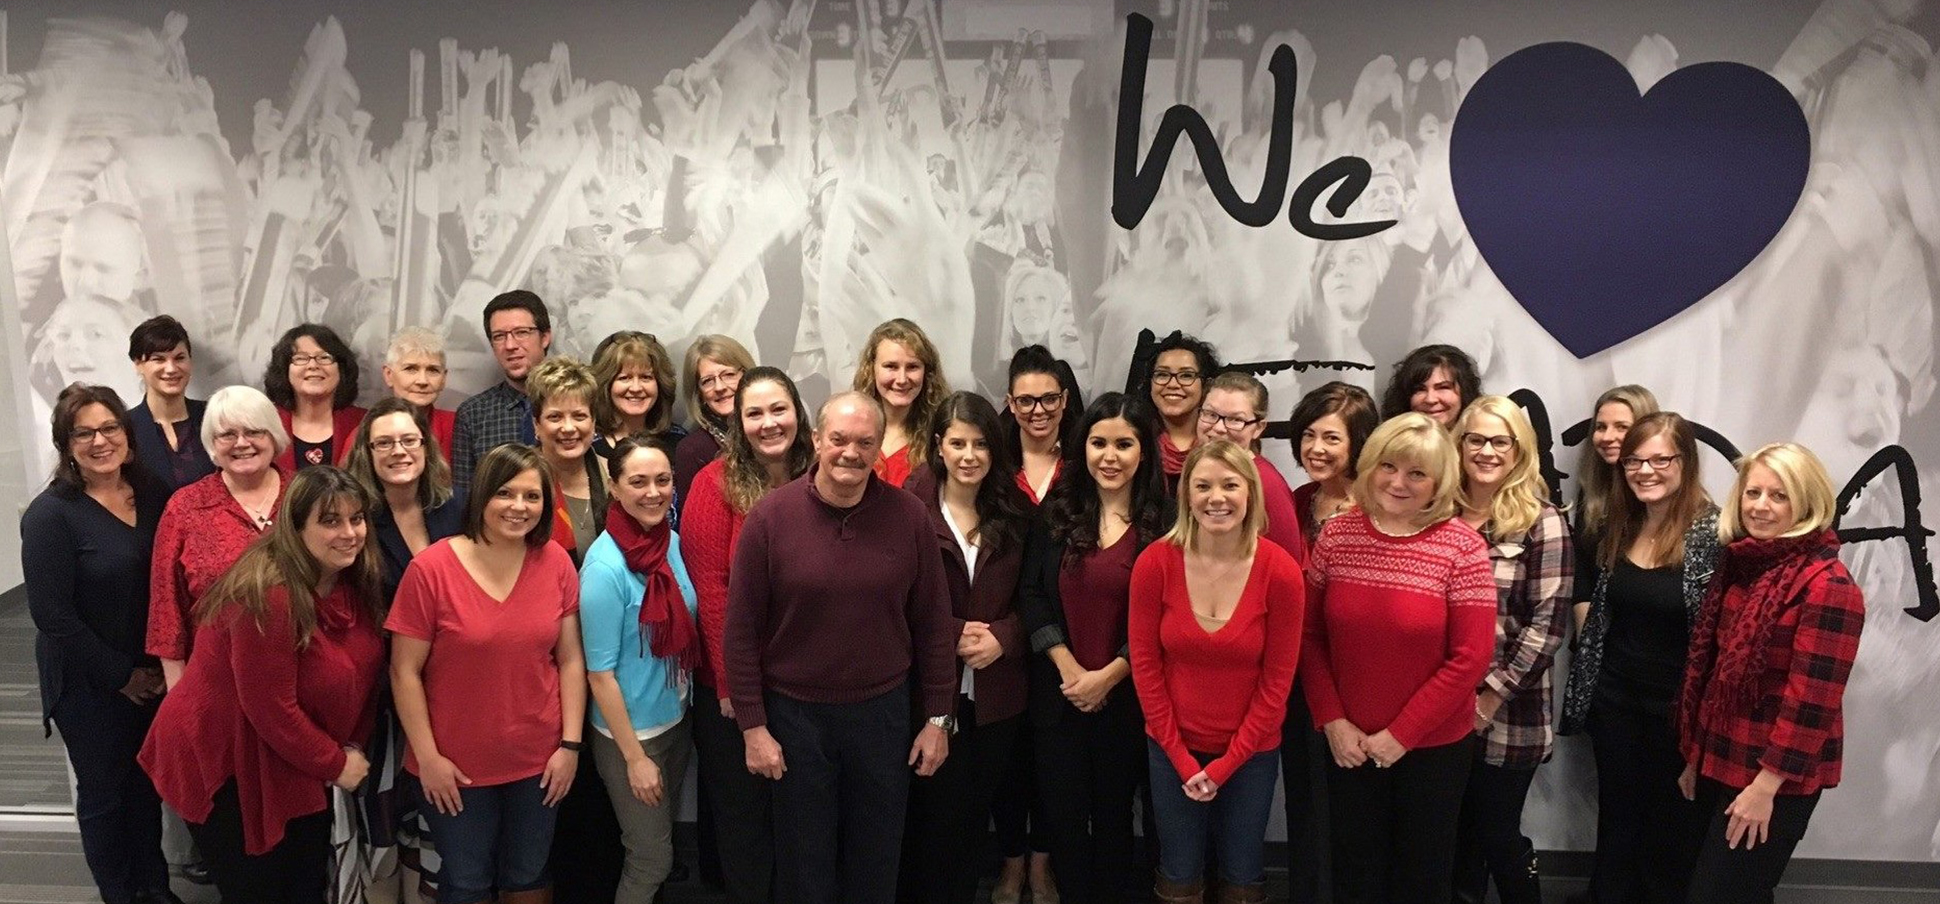 Immunize team of partners dressed in red